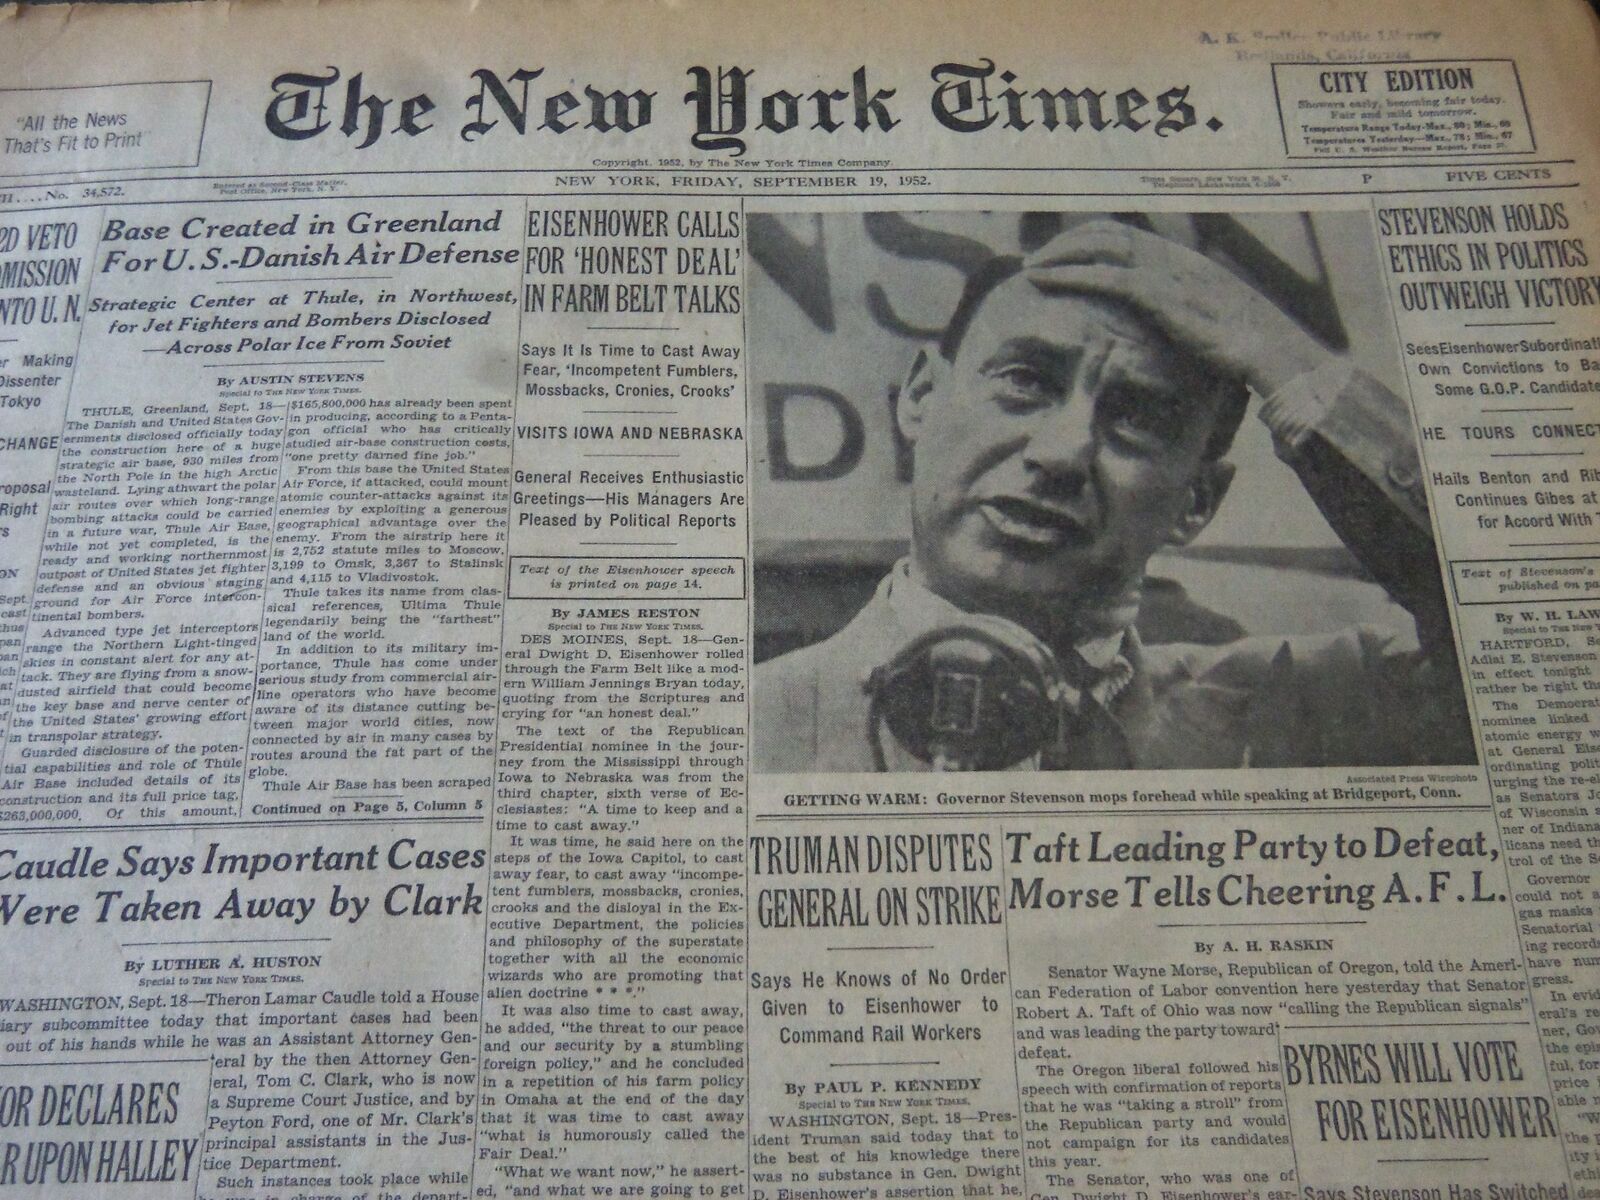 1952 SEPT 19 NEW YORK TIMES - STEVENSON HOLDS ETHICS OUTWEIGH VICTORY - NT 6122